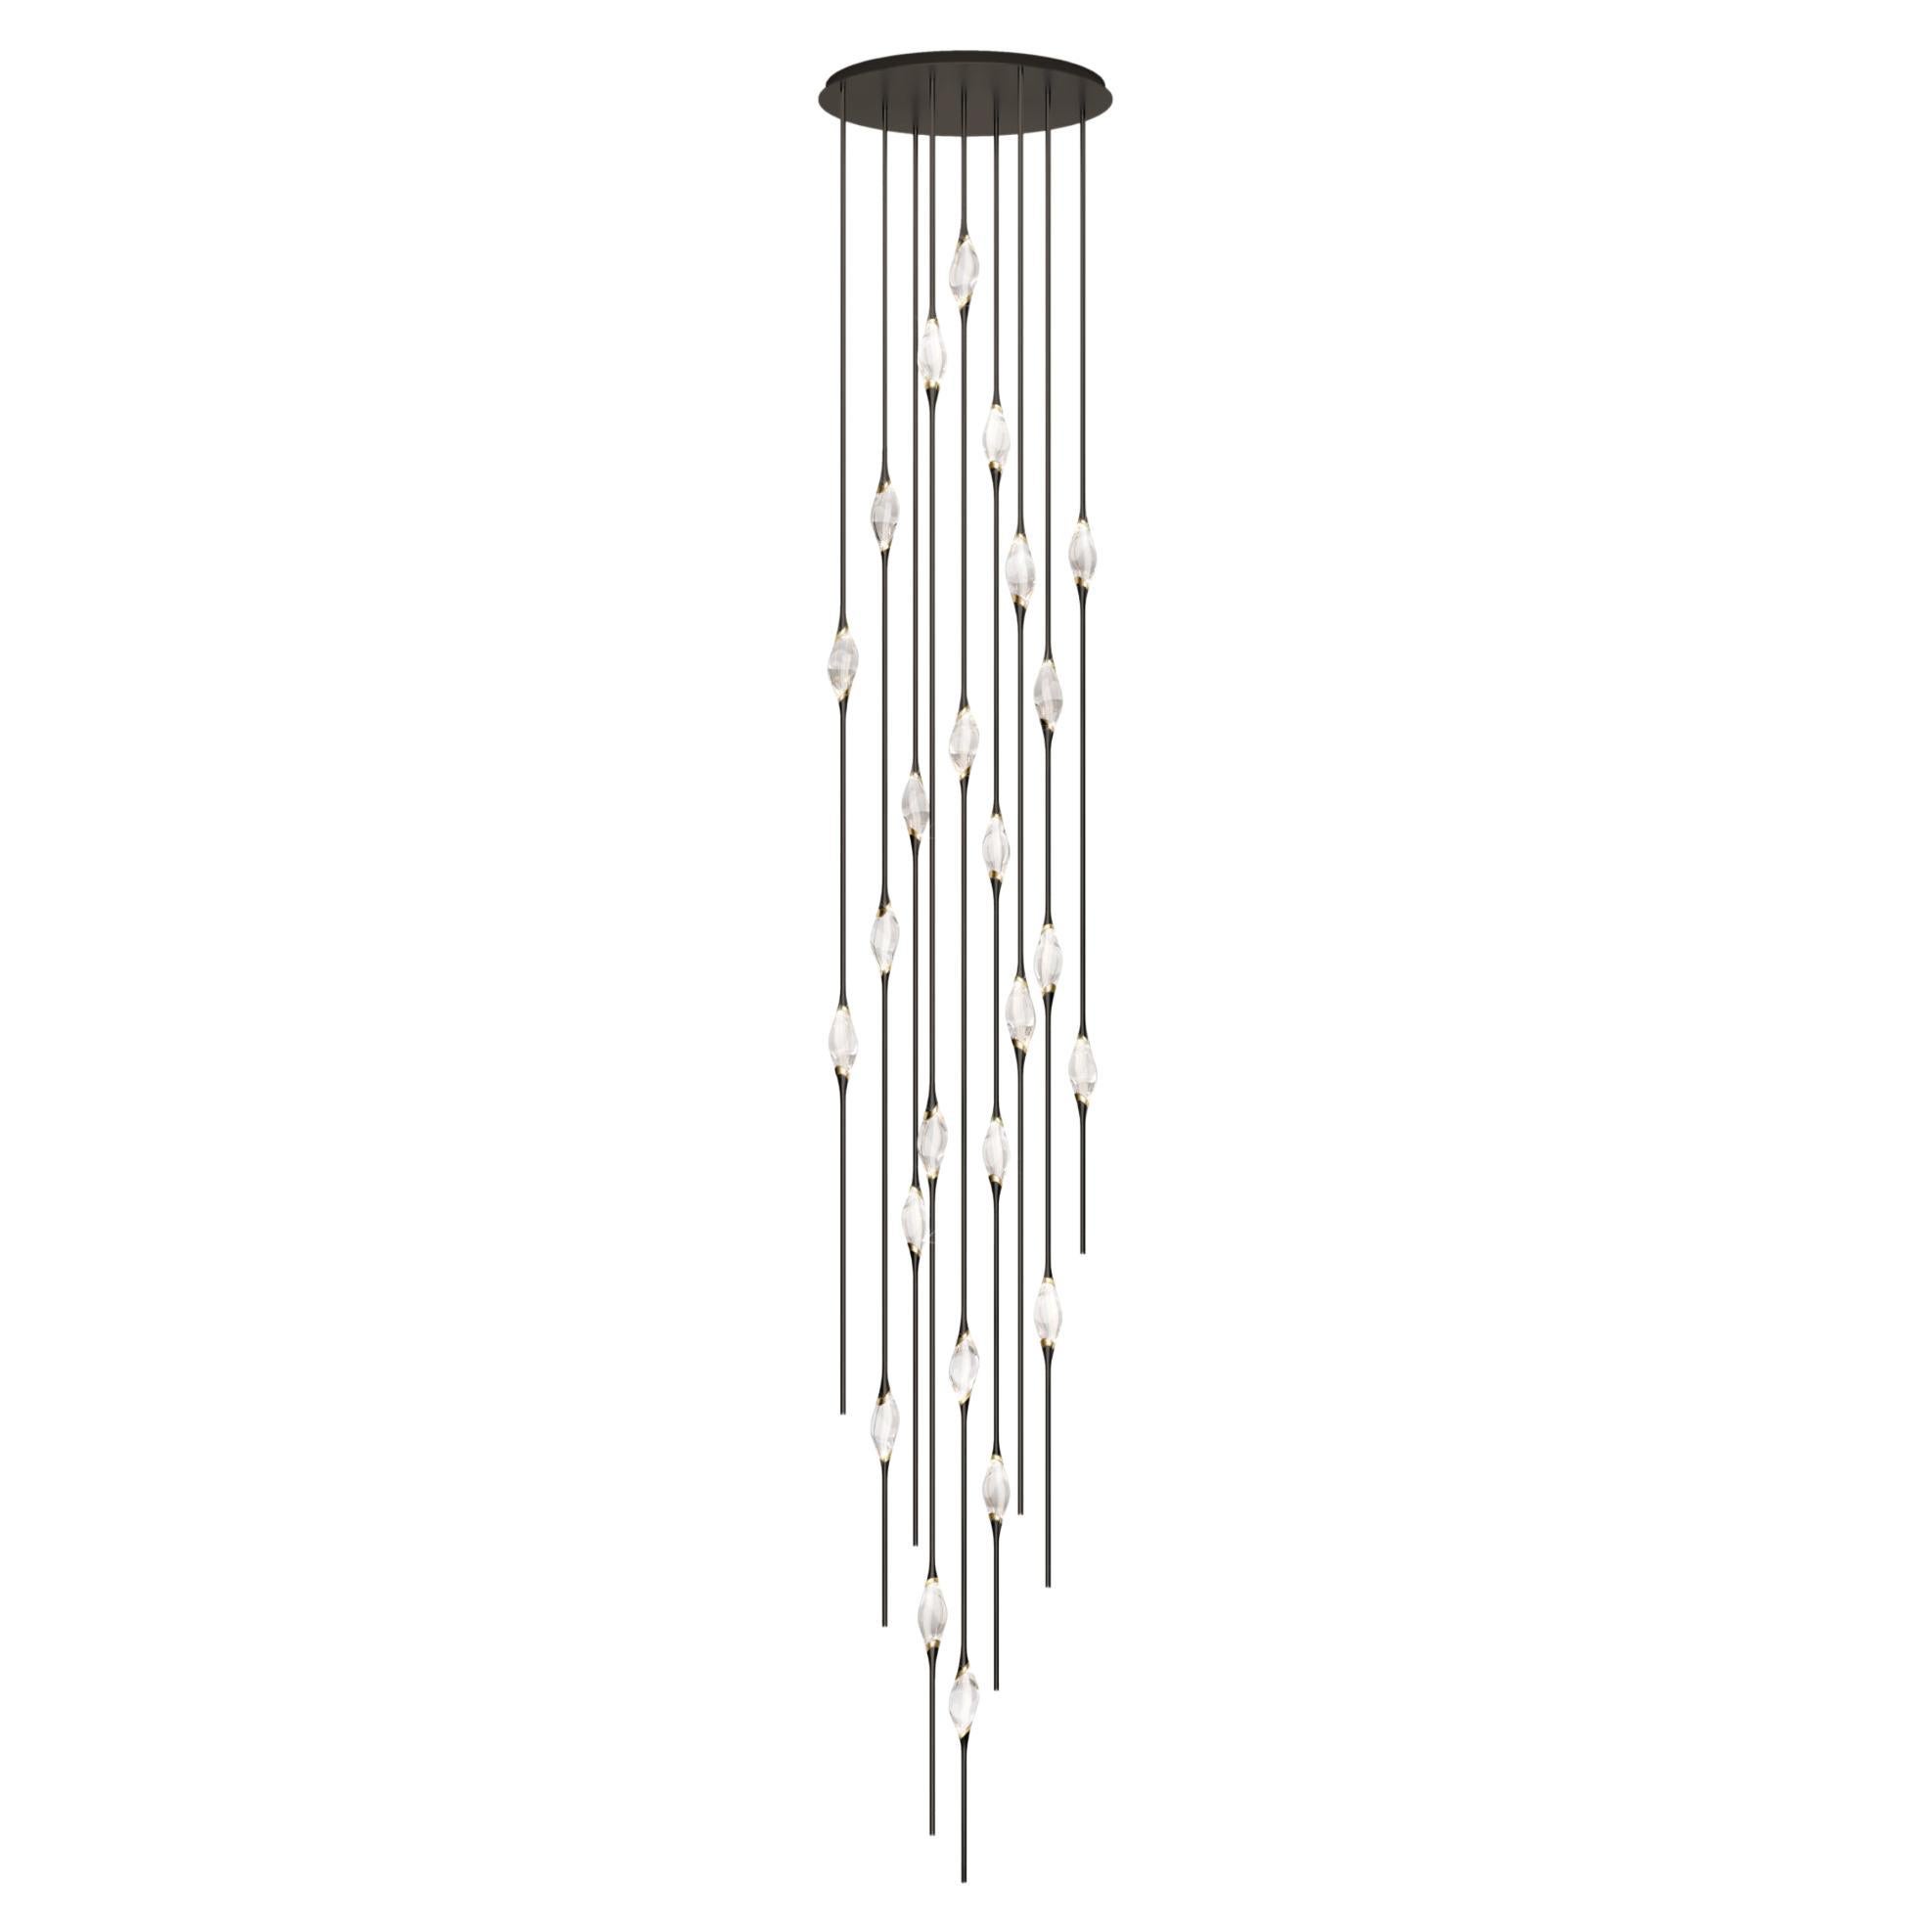 "Il Pezzo 12 Cluster Chandelier" - height 550cm/216" - black and polished brass